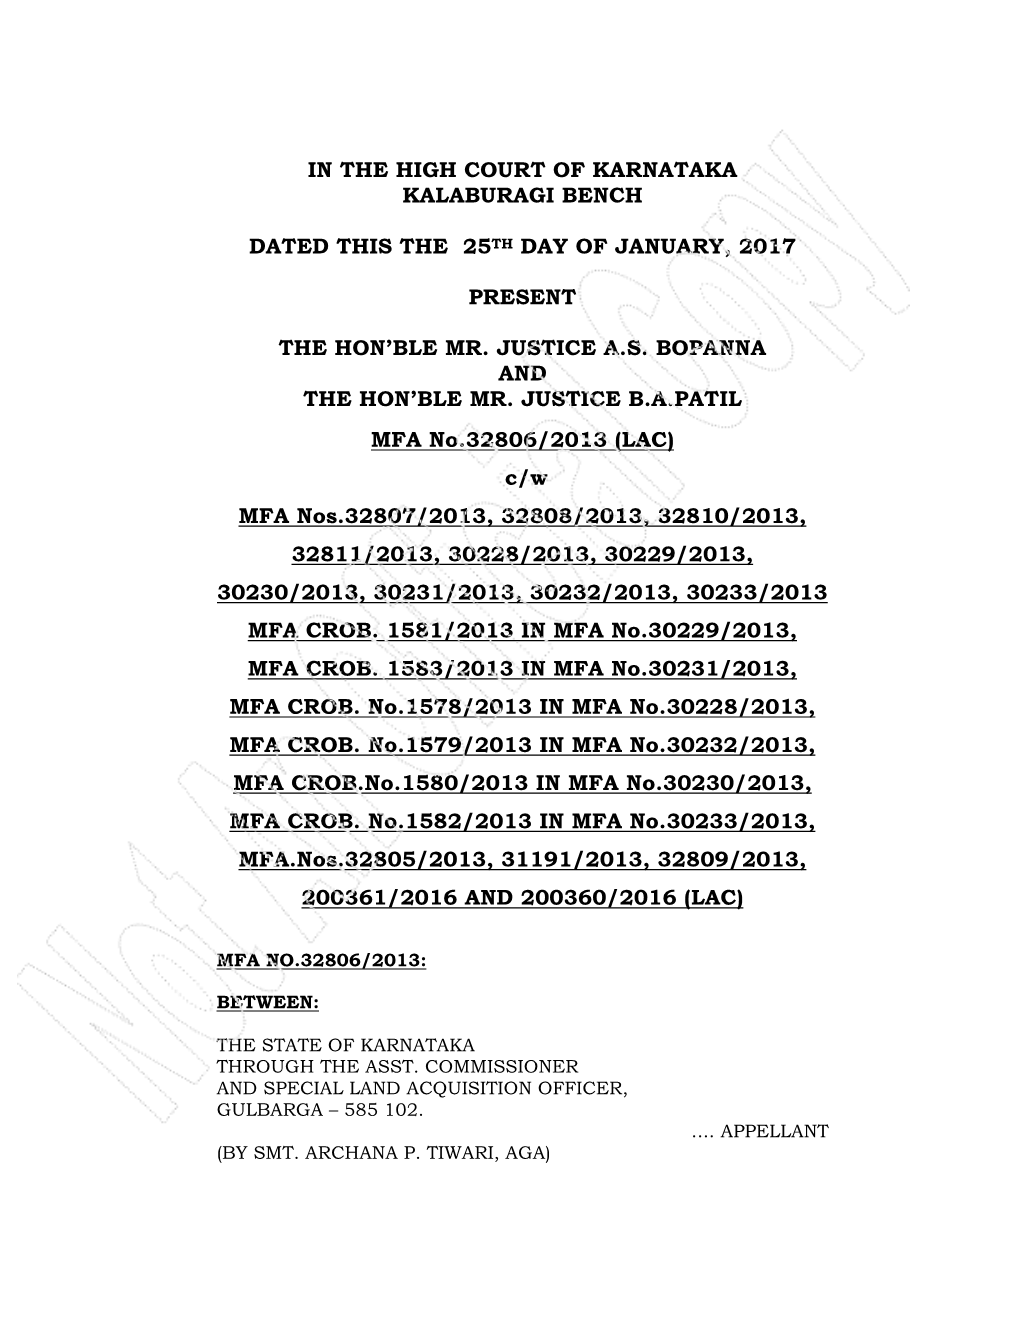 In the High Court of Karnataka Kalaburagi Bench Dated This the 25Th Day of January, 2017 Present the Hon'ble Mr. Justice A.S